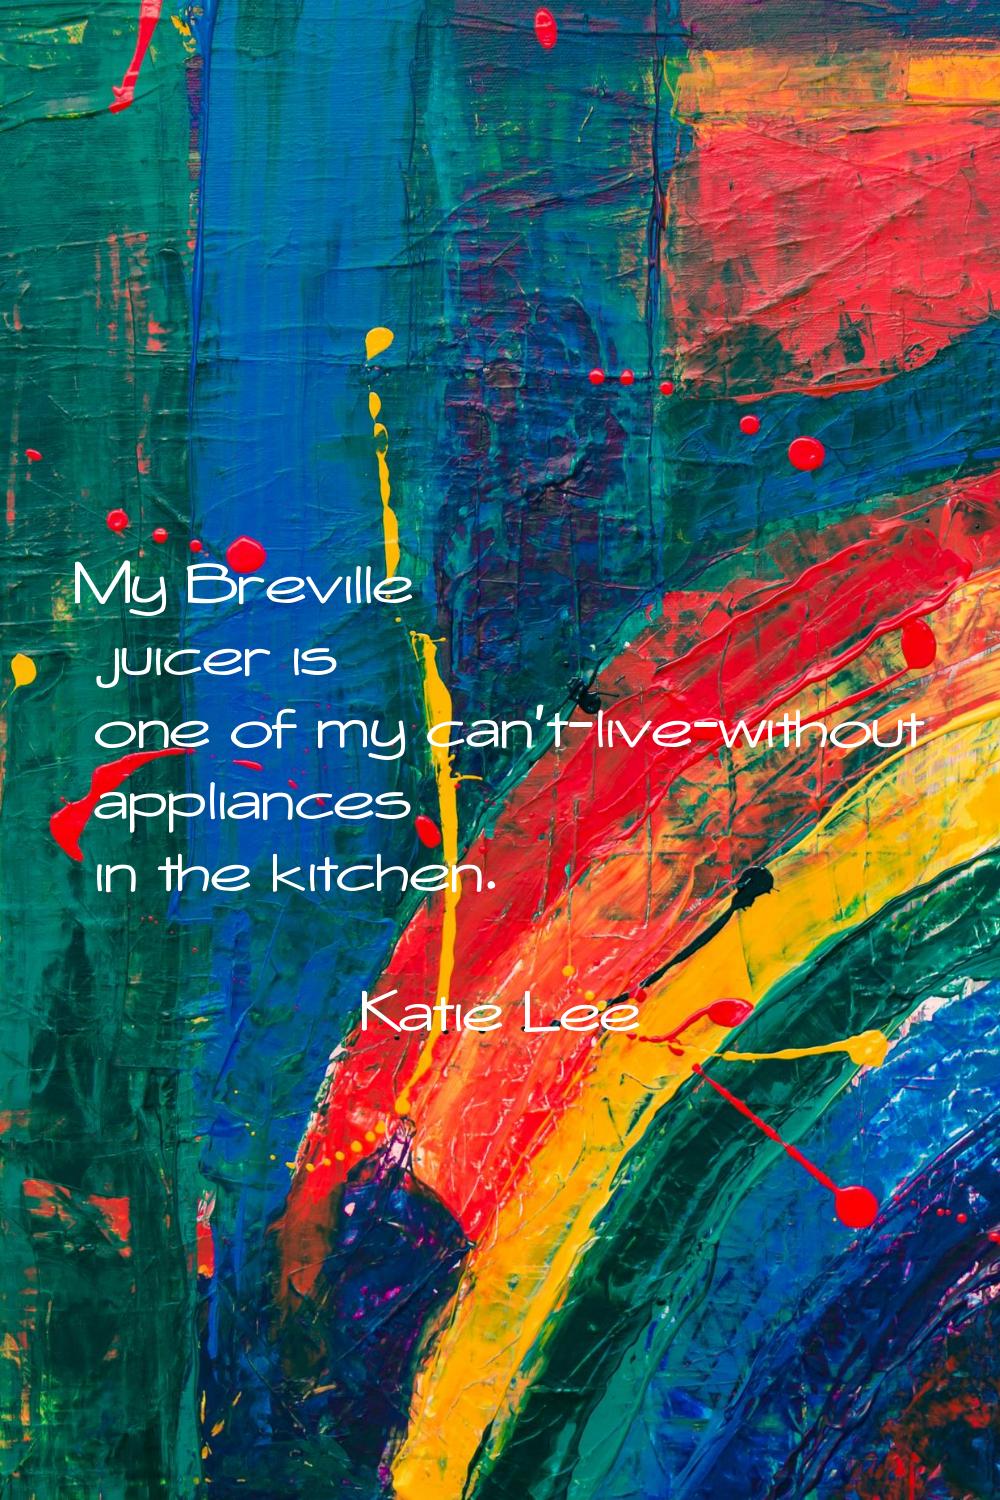 My Breville juicer is one of my can't-live-without appliances in the kitchen.